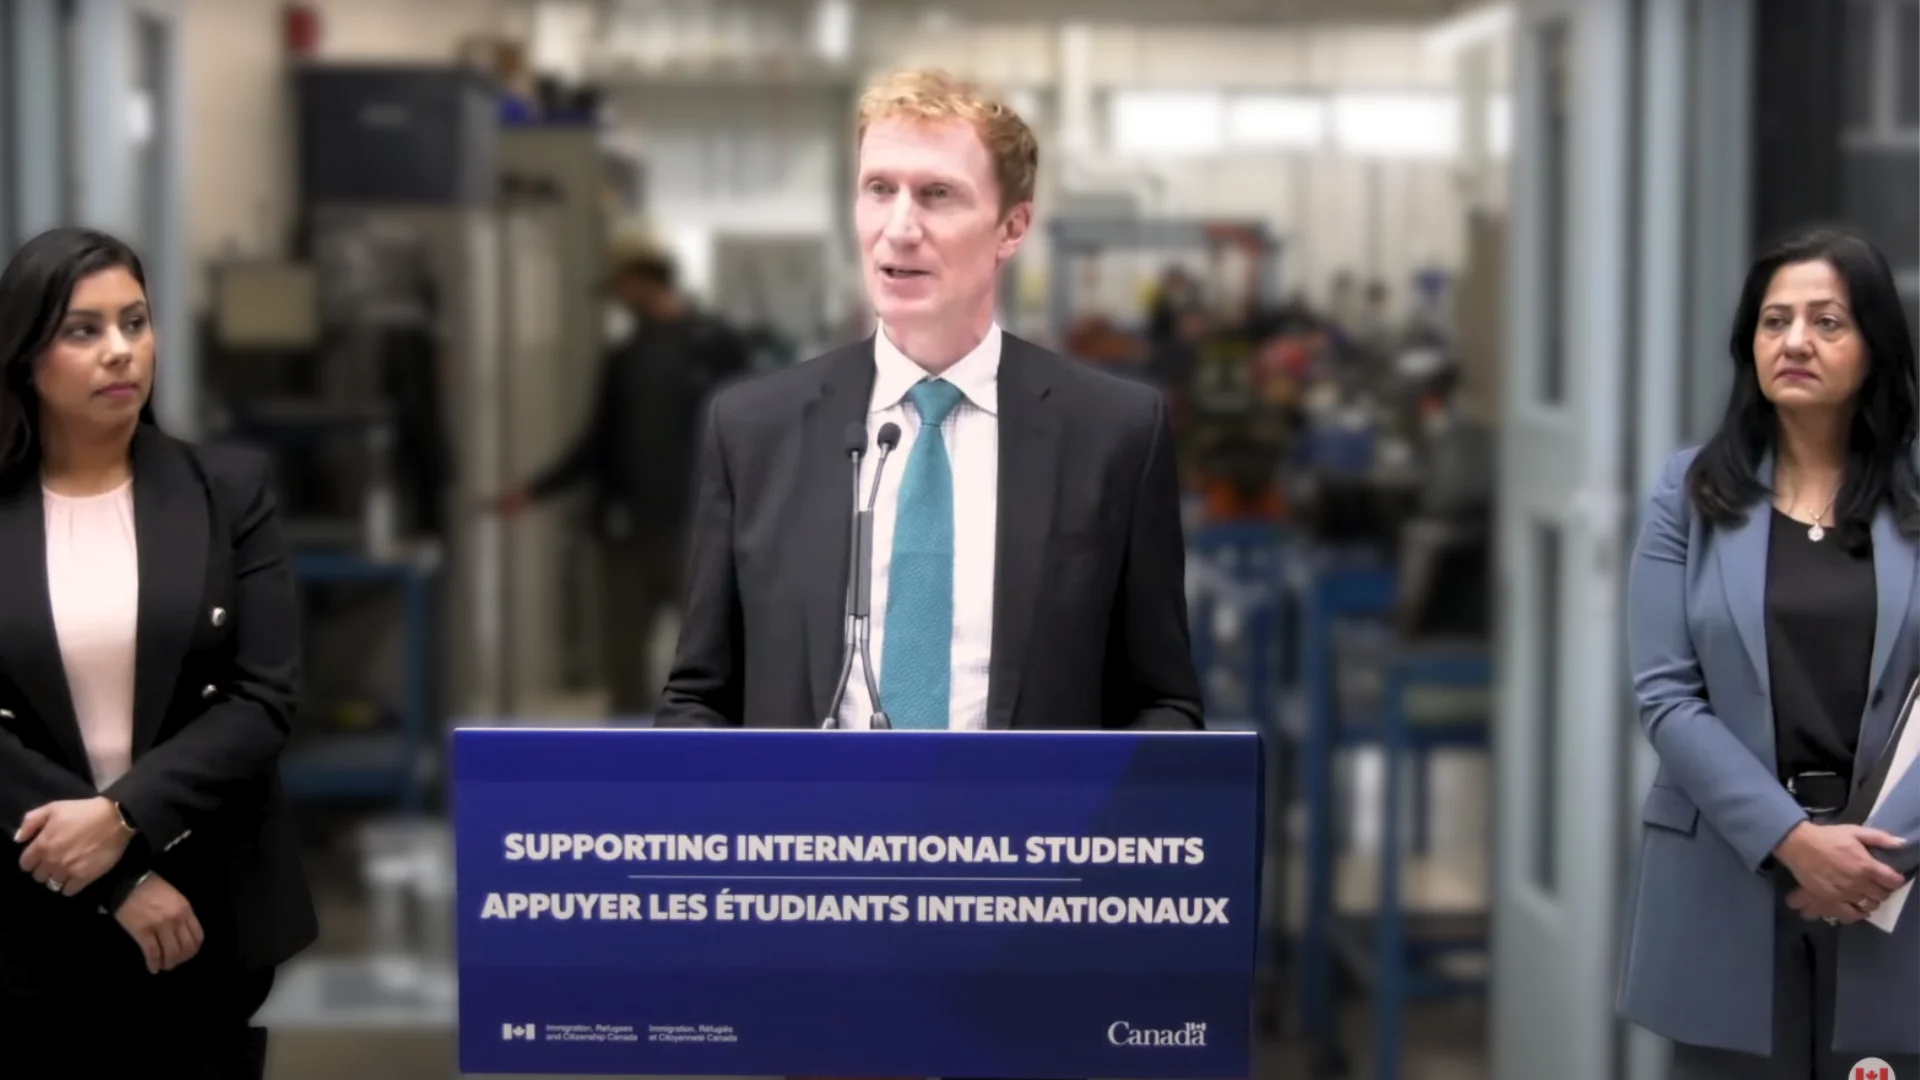 New Announcements for International Students Program Improvements by Marc Miller ,Minister of Immigration, Refugees and Citizenship of Canada